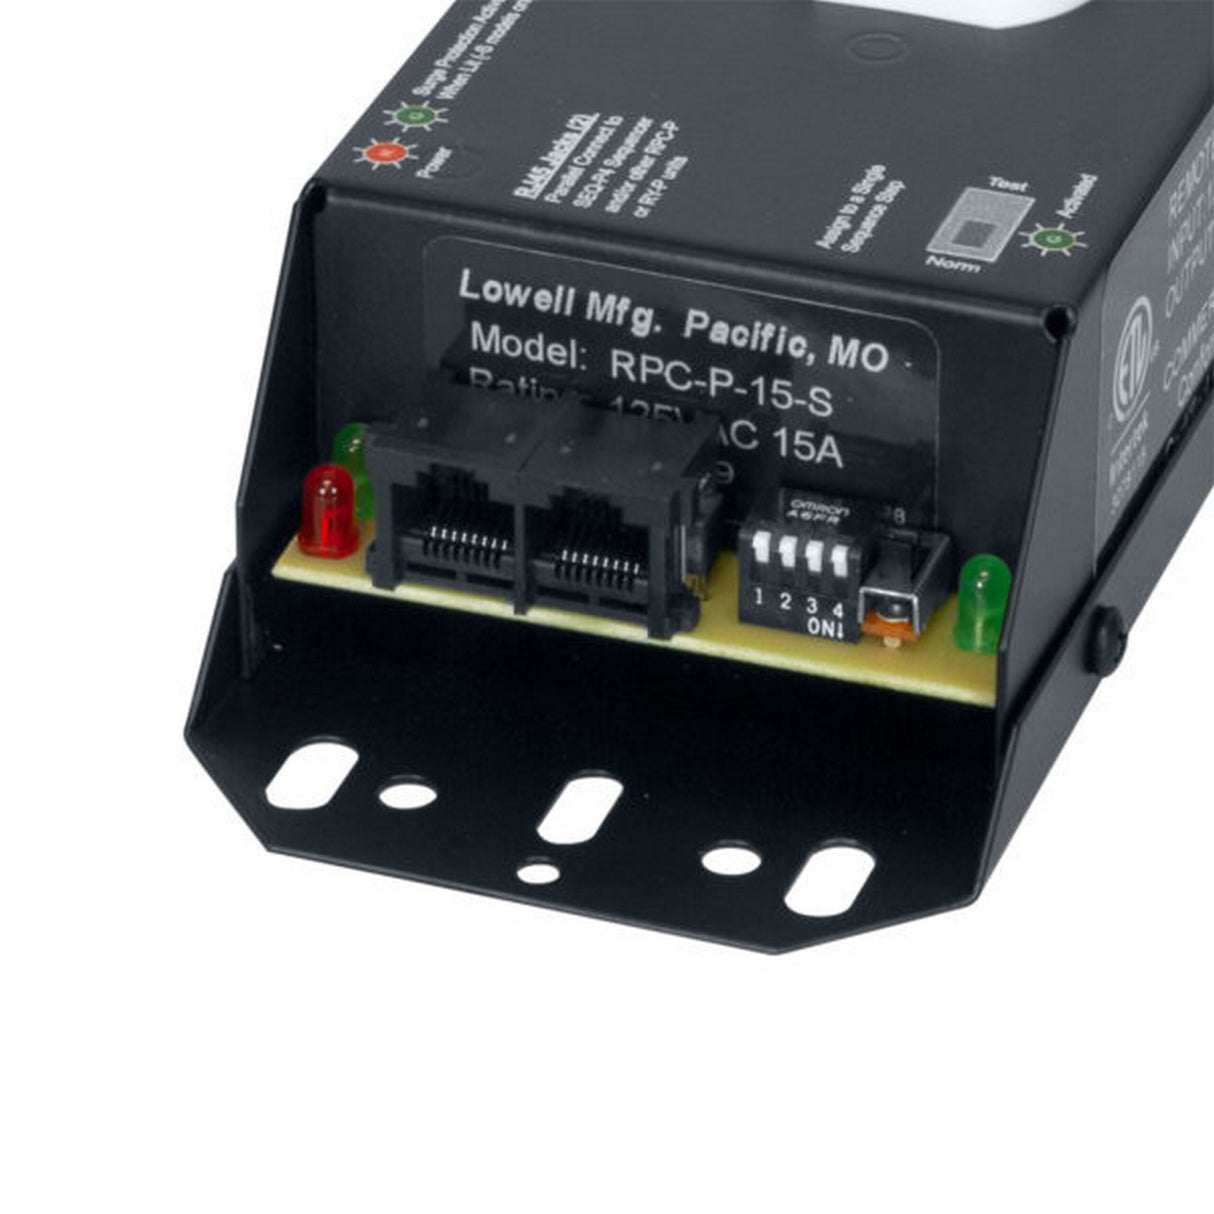 Lowell RPC-P15-S Pass-Through Remote Power Control, 15A, 5-15R Duplex Outlet, Surge Supp Protection, Cord